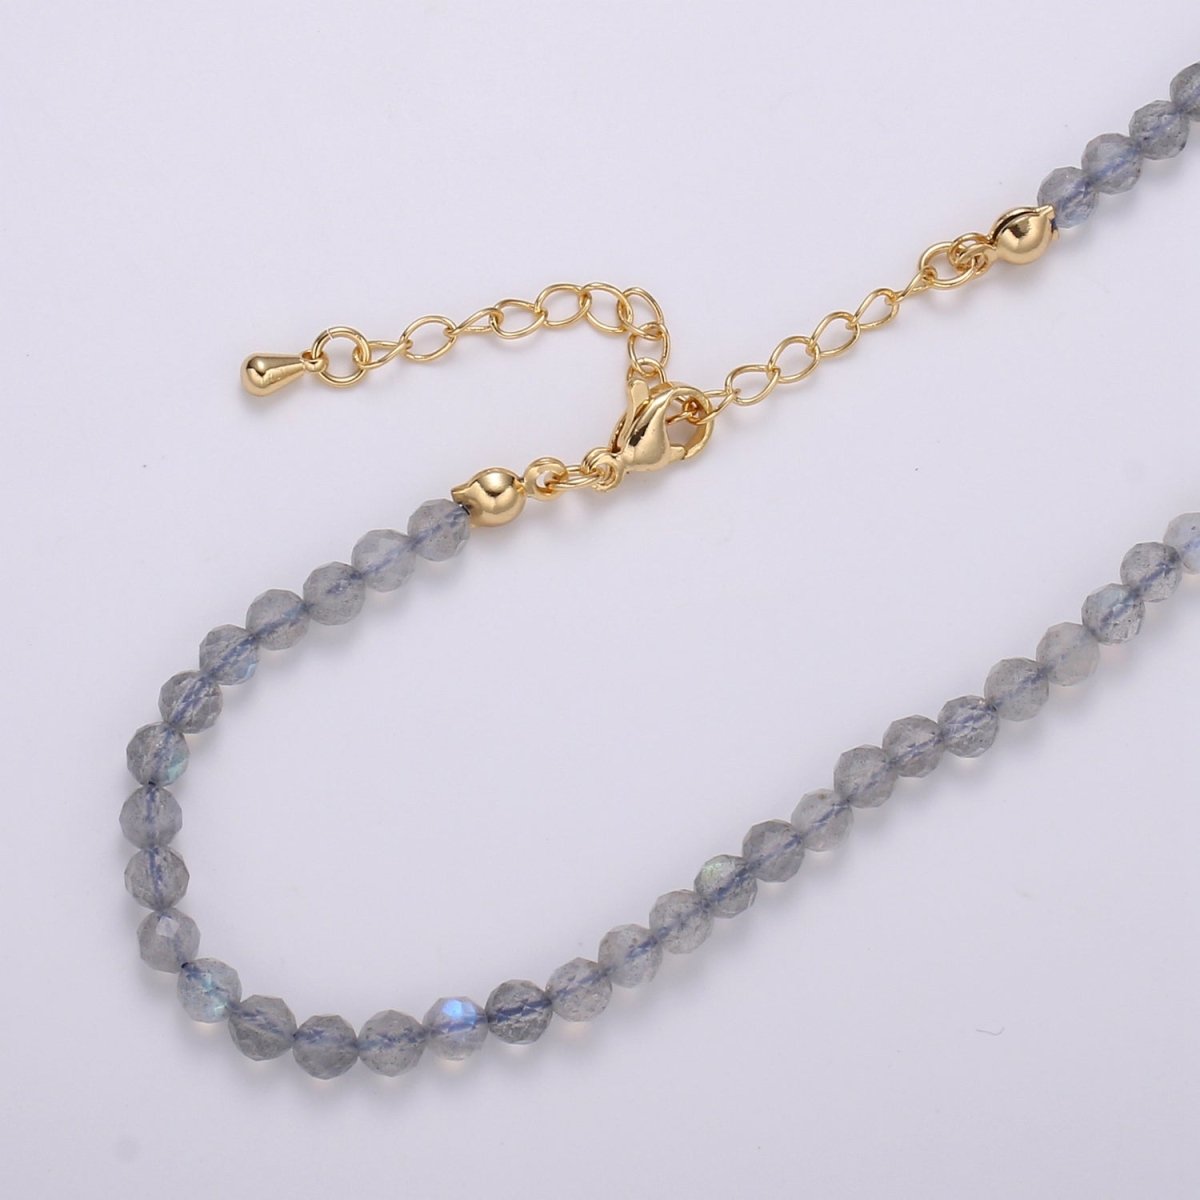 Stunning Black Moonstone Gemstone Tiny Dainty Bead Gold Necklace, Necklace For Women, Precious Stone Bead Necklace | WA-016 Clearance Pricing - DLUXCA